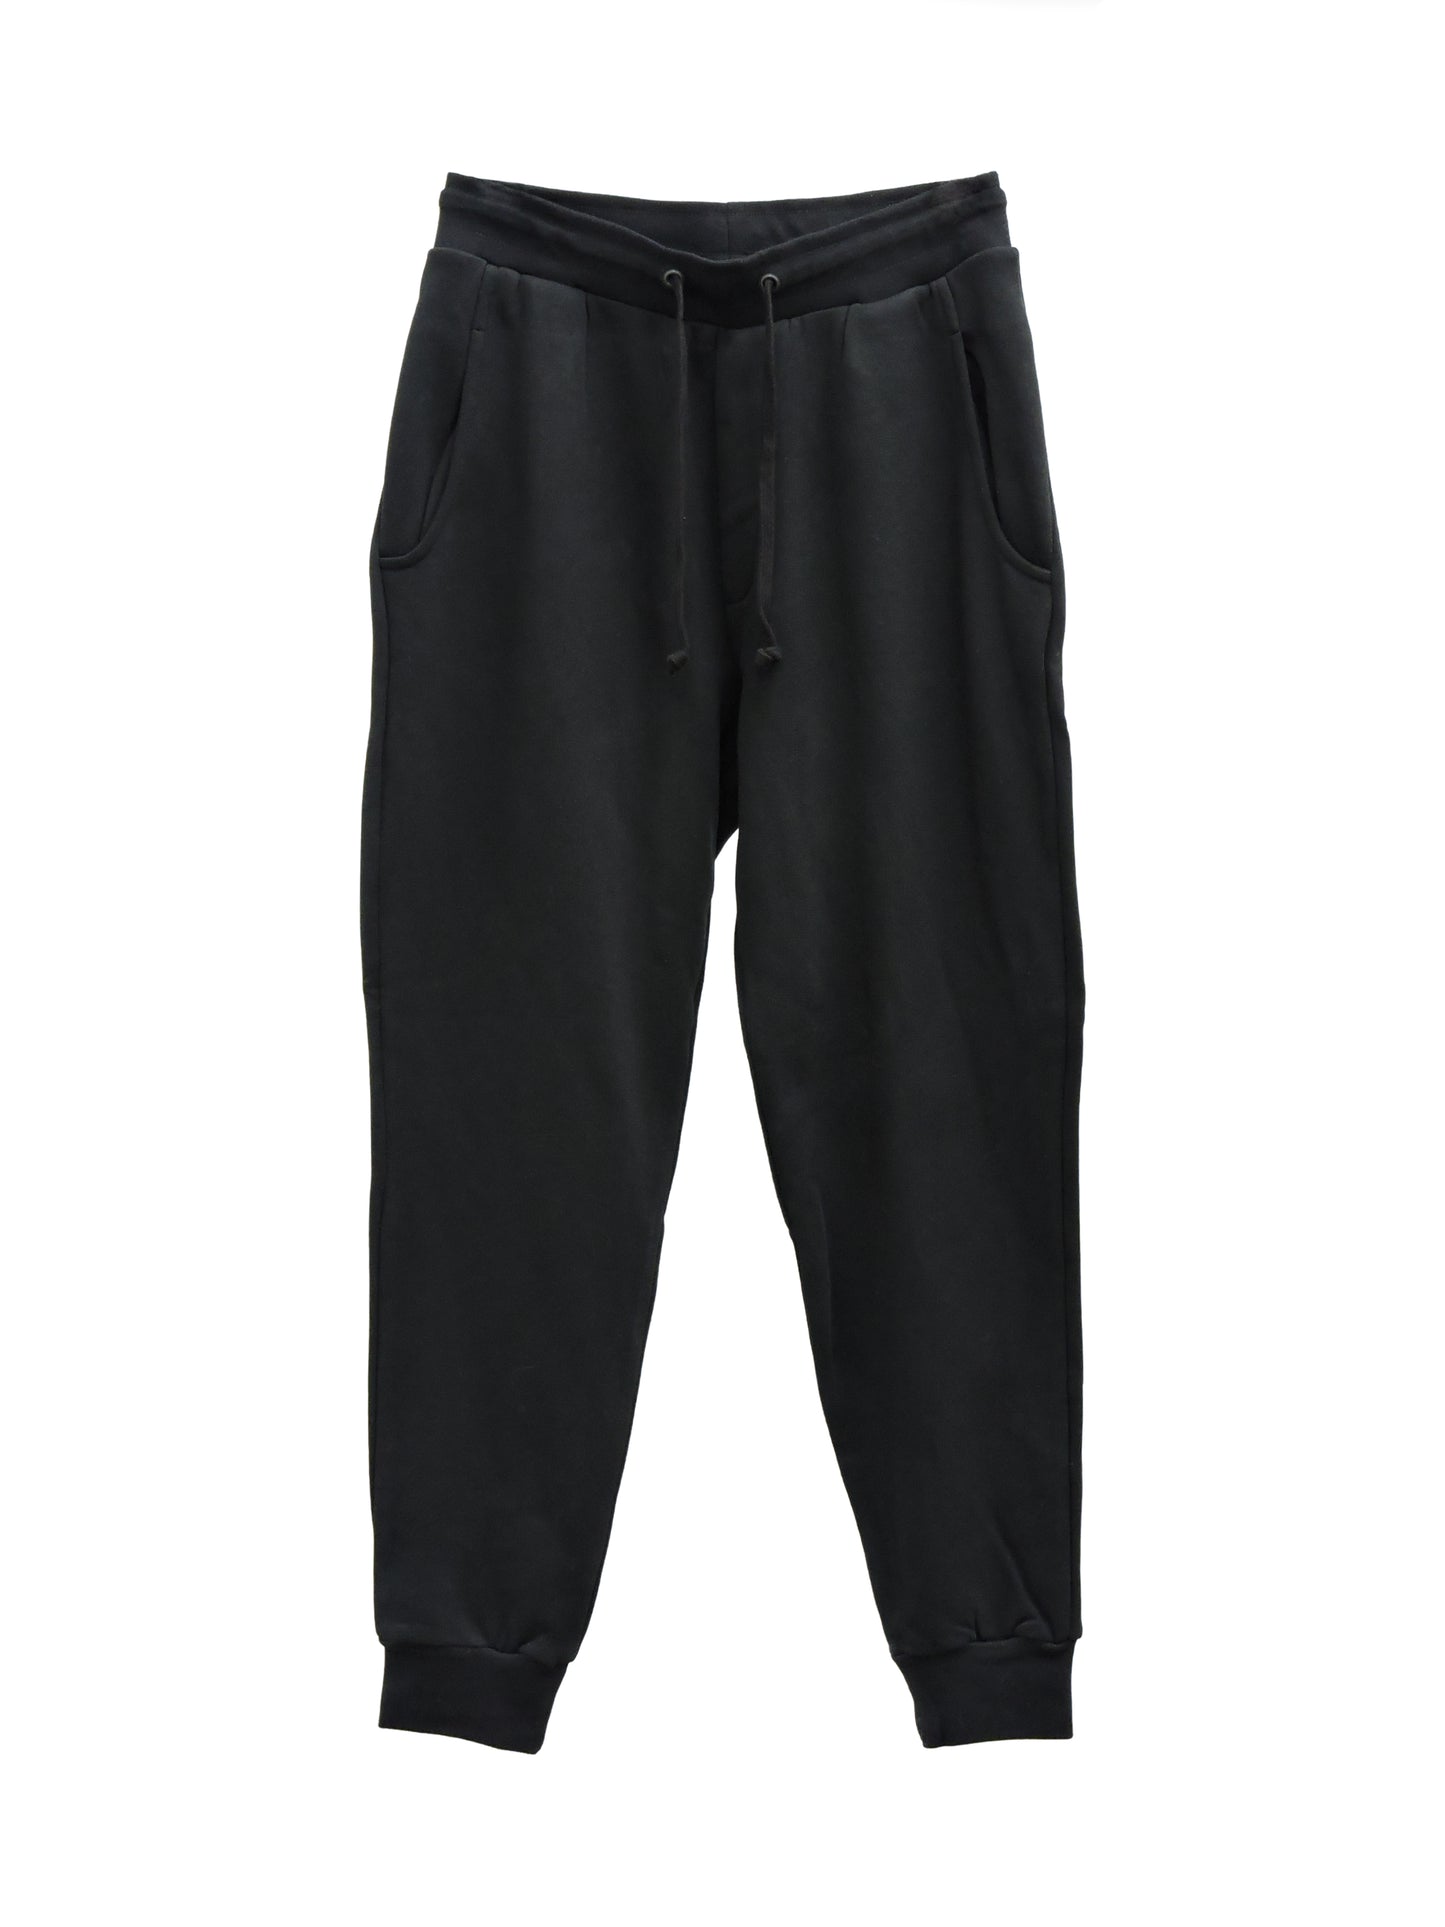 Black French Terry Jogger with thin long black drawstrings